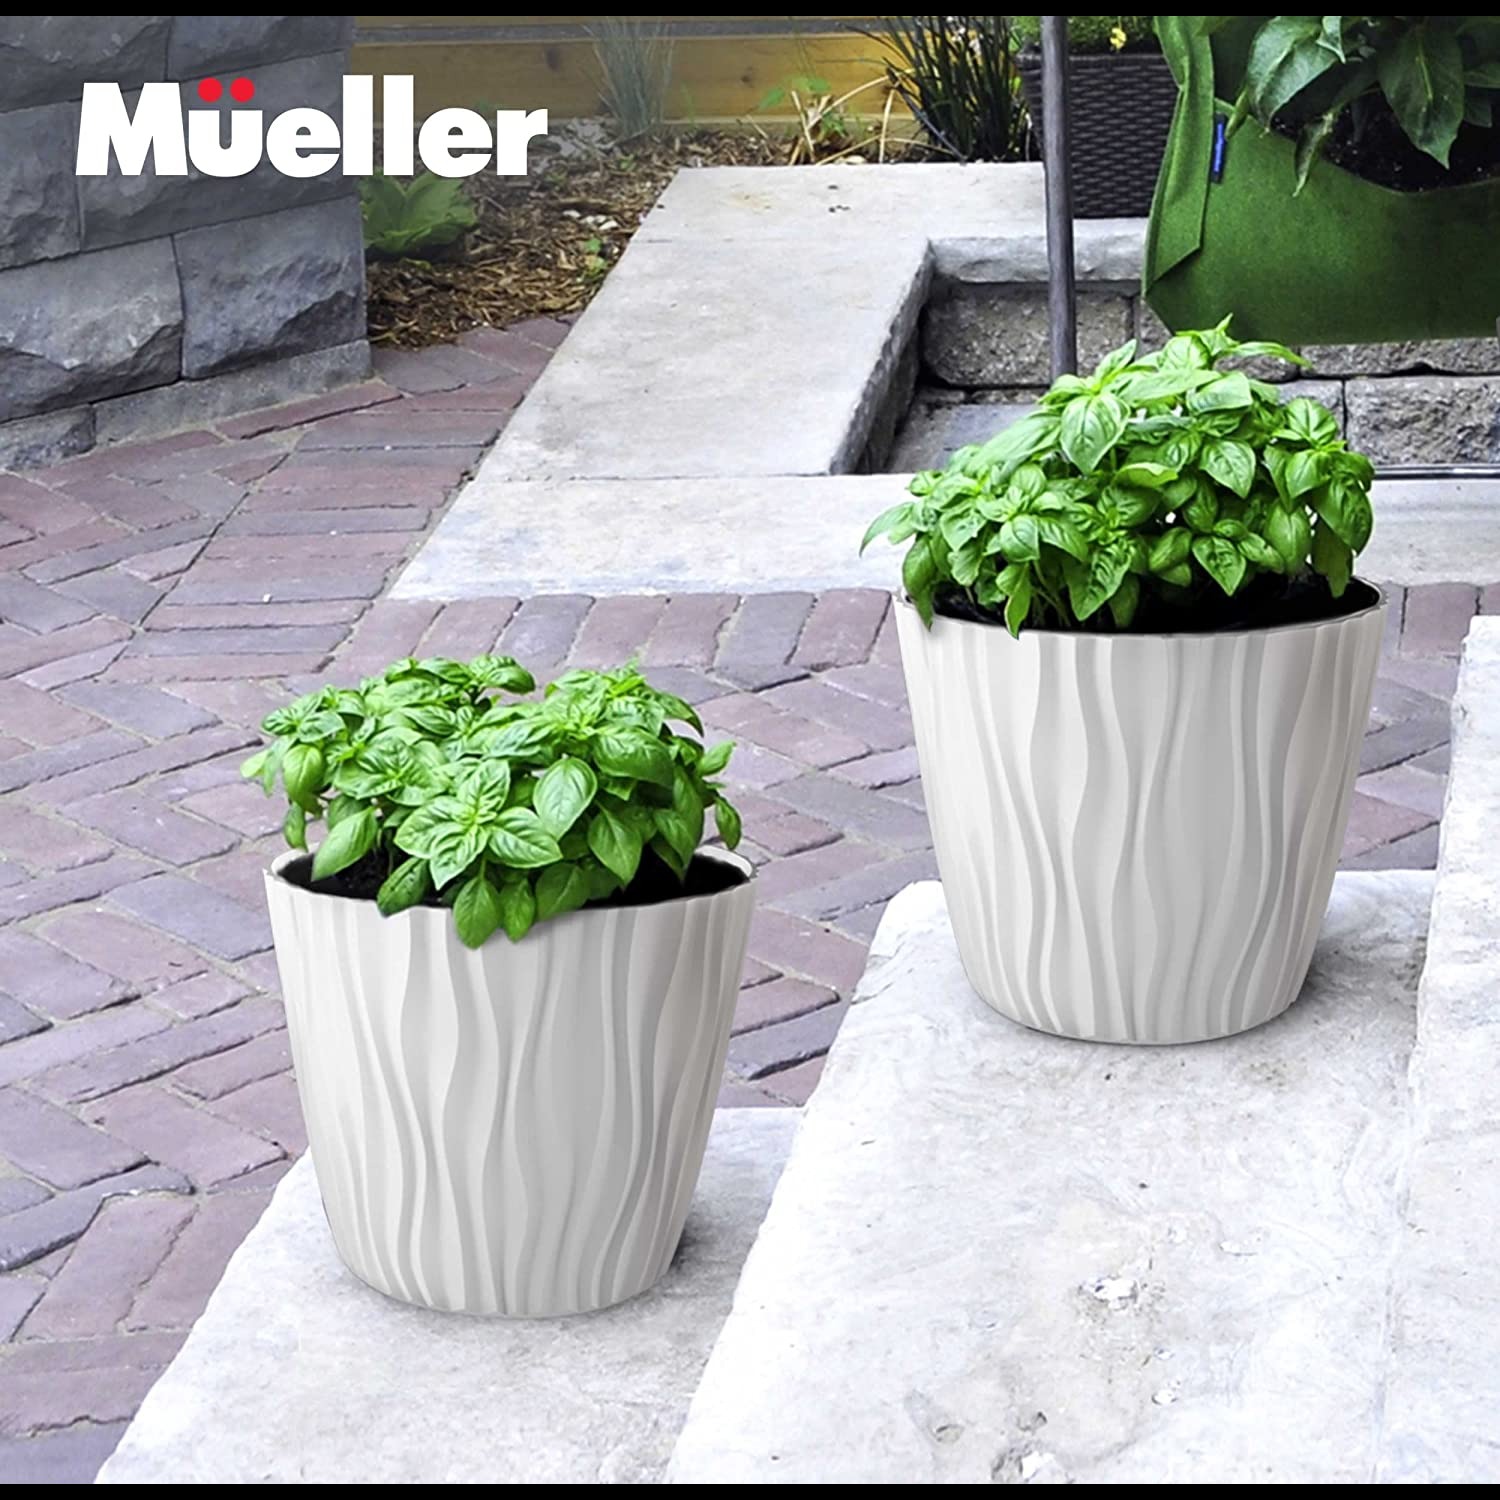 muellerhome_Decorative-Plant-and-Flower-Pots-Mixed-5-Piece-White-Set-7